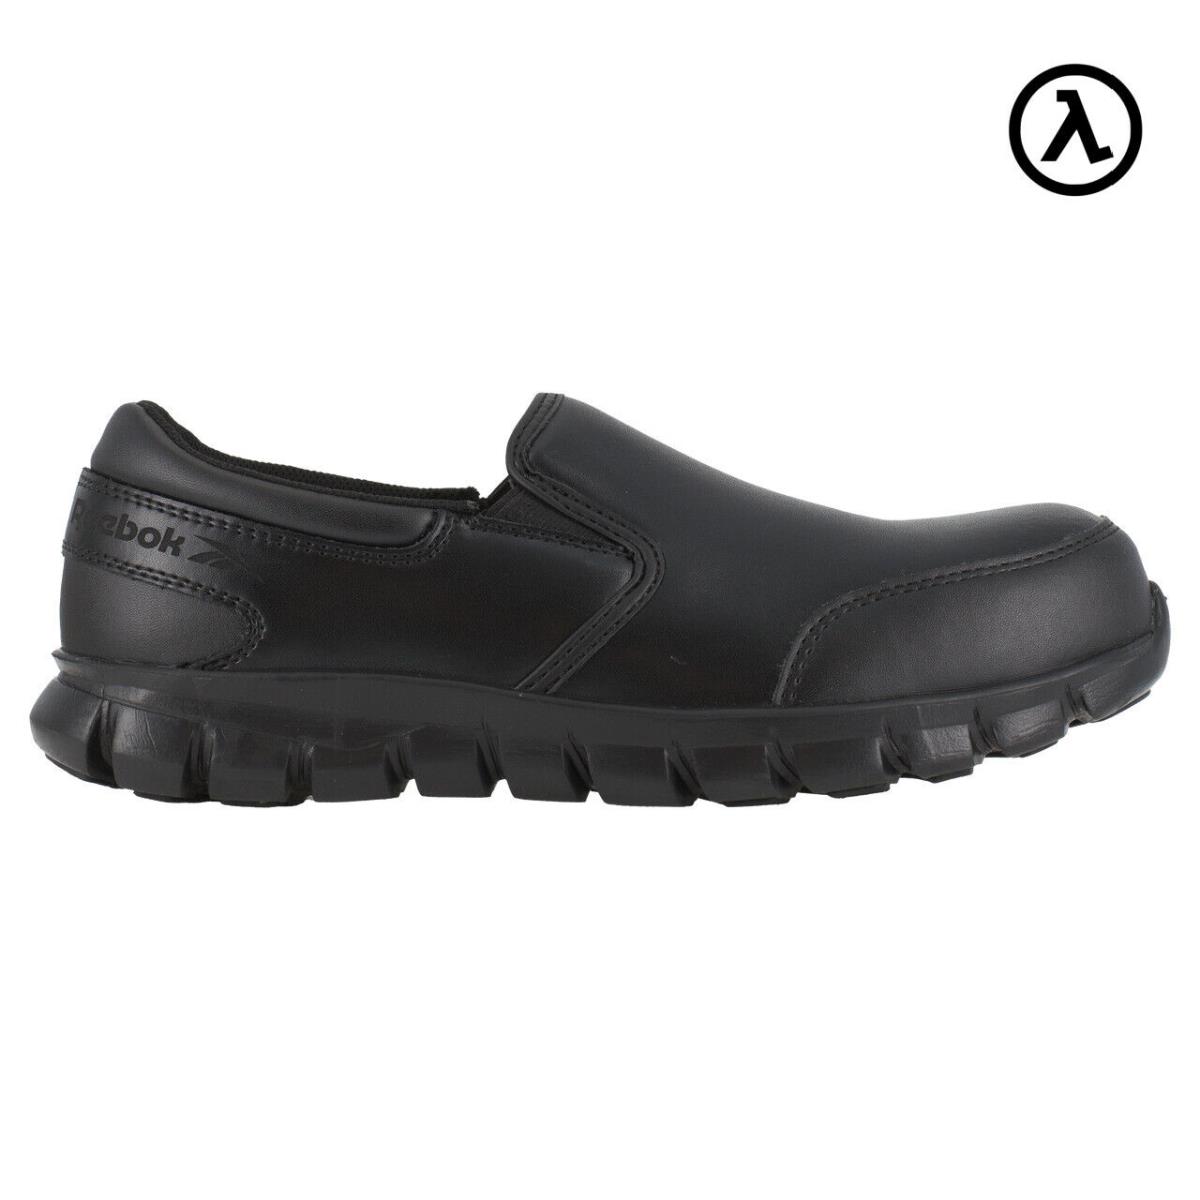 Reebok Sublite Cushion Work Men`s Athletic Slip ON Black Boots RB4036 - All Size